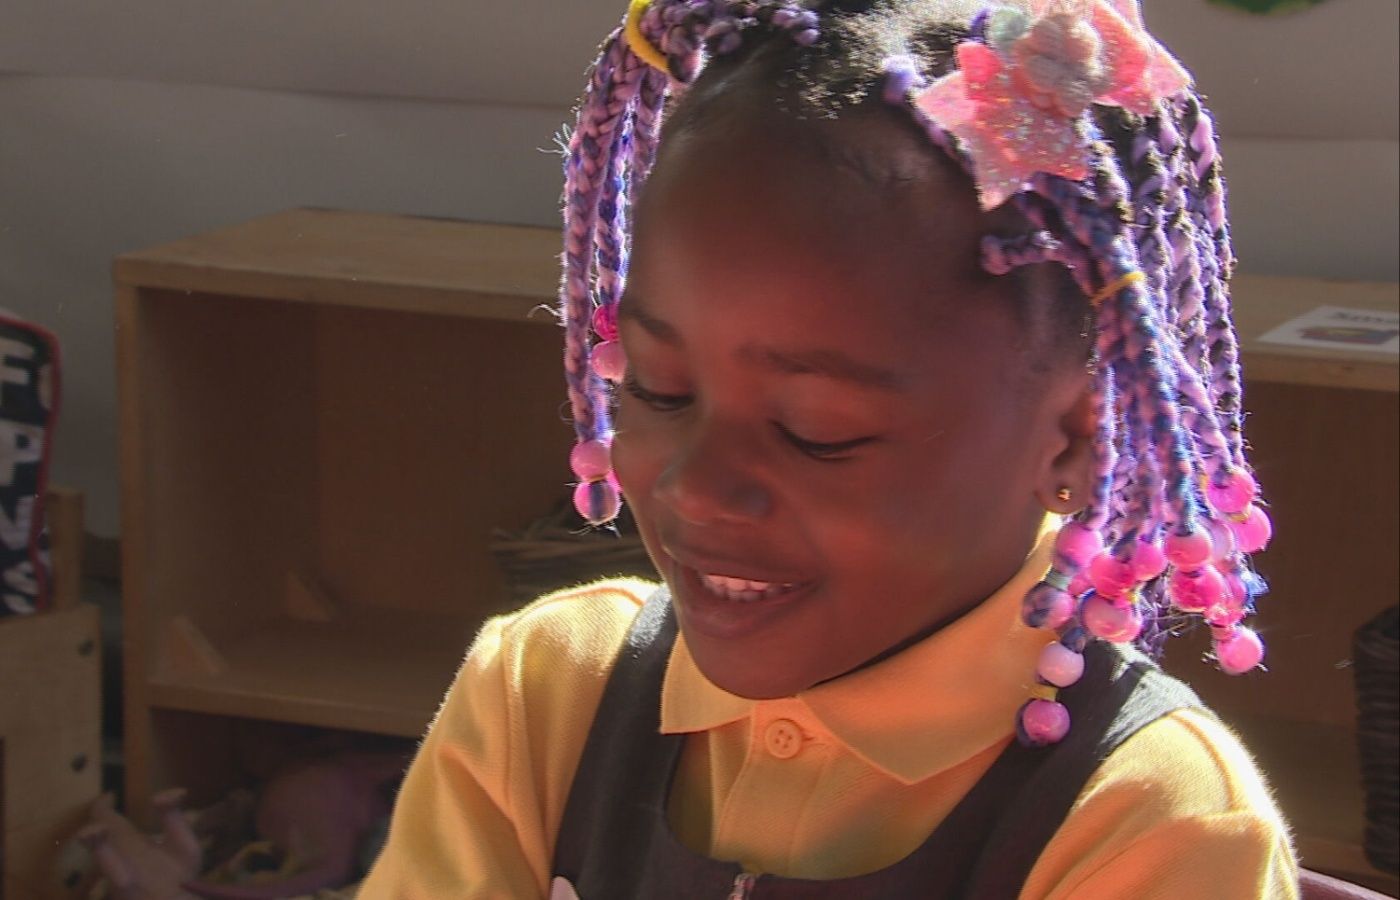 Five-year-old Ameerah who was meant to go to school last year but her mum chose to delay her start.